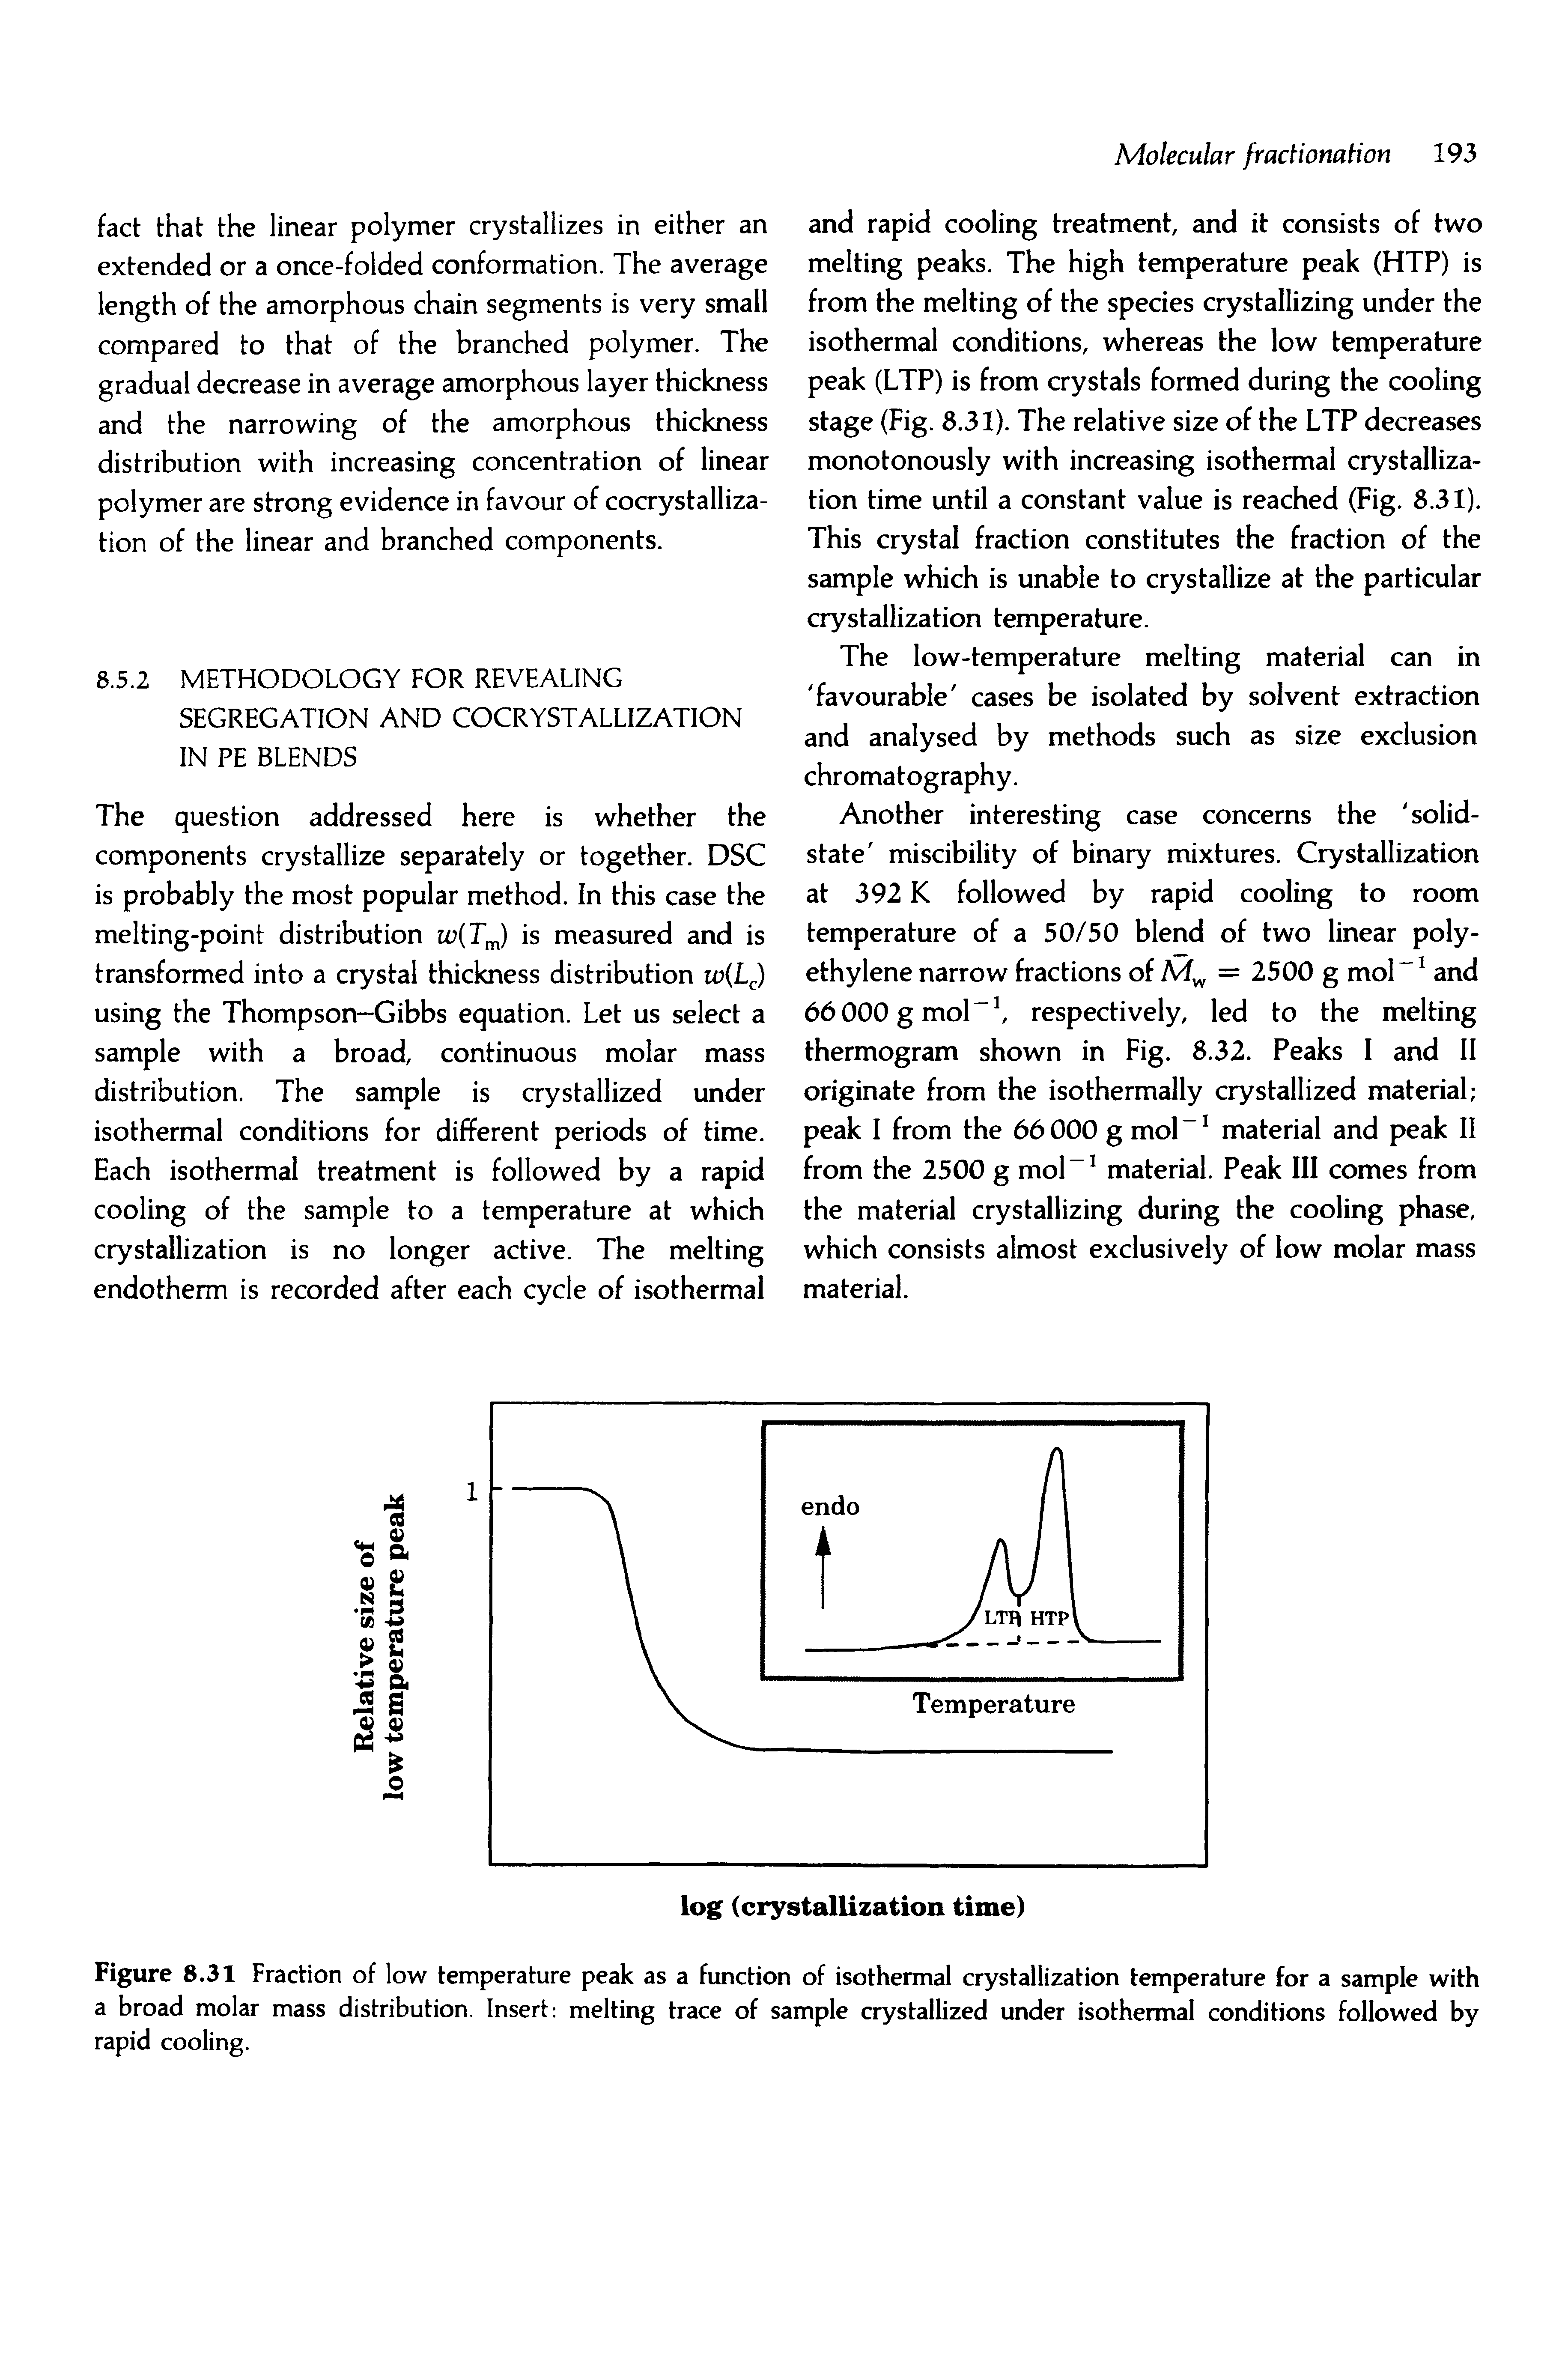 Figure 8.31 Fraction of low temperature peak as a function of isothermal crystallization temperature for a sample with a broad molar mass distribution. Insert melting trace of sample crystallized under isothermal conditions followed by rapid cooling.